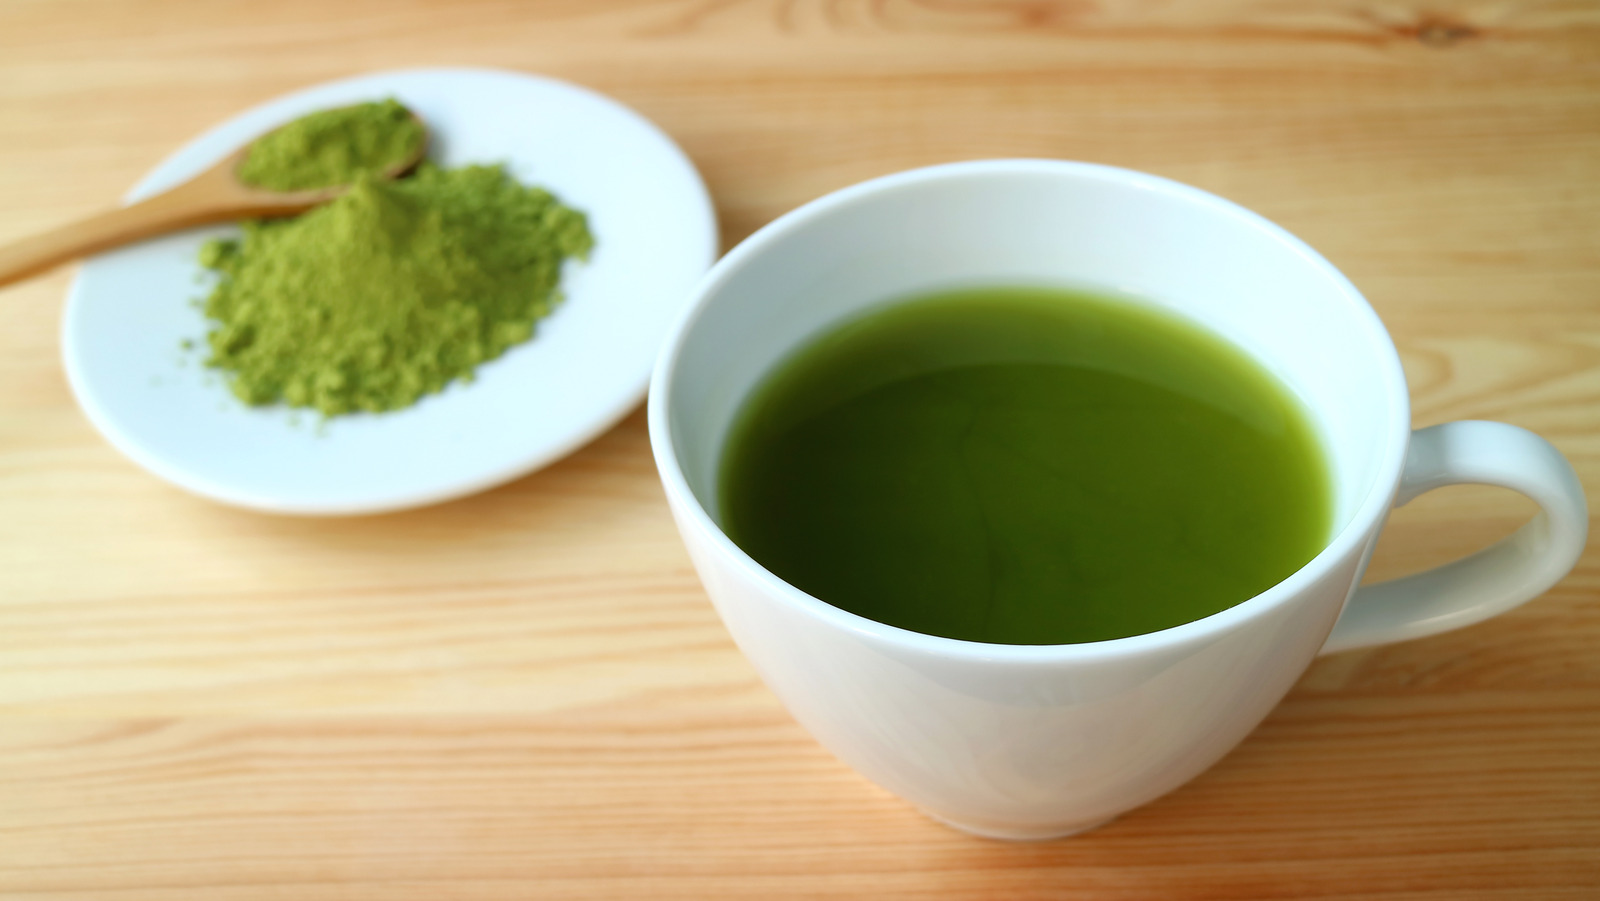 What Makes Green Tea Such A Powerful Superfood